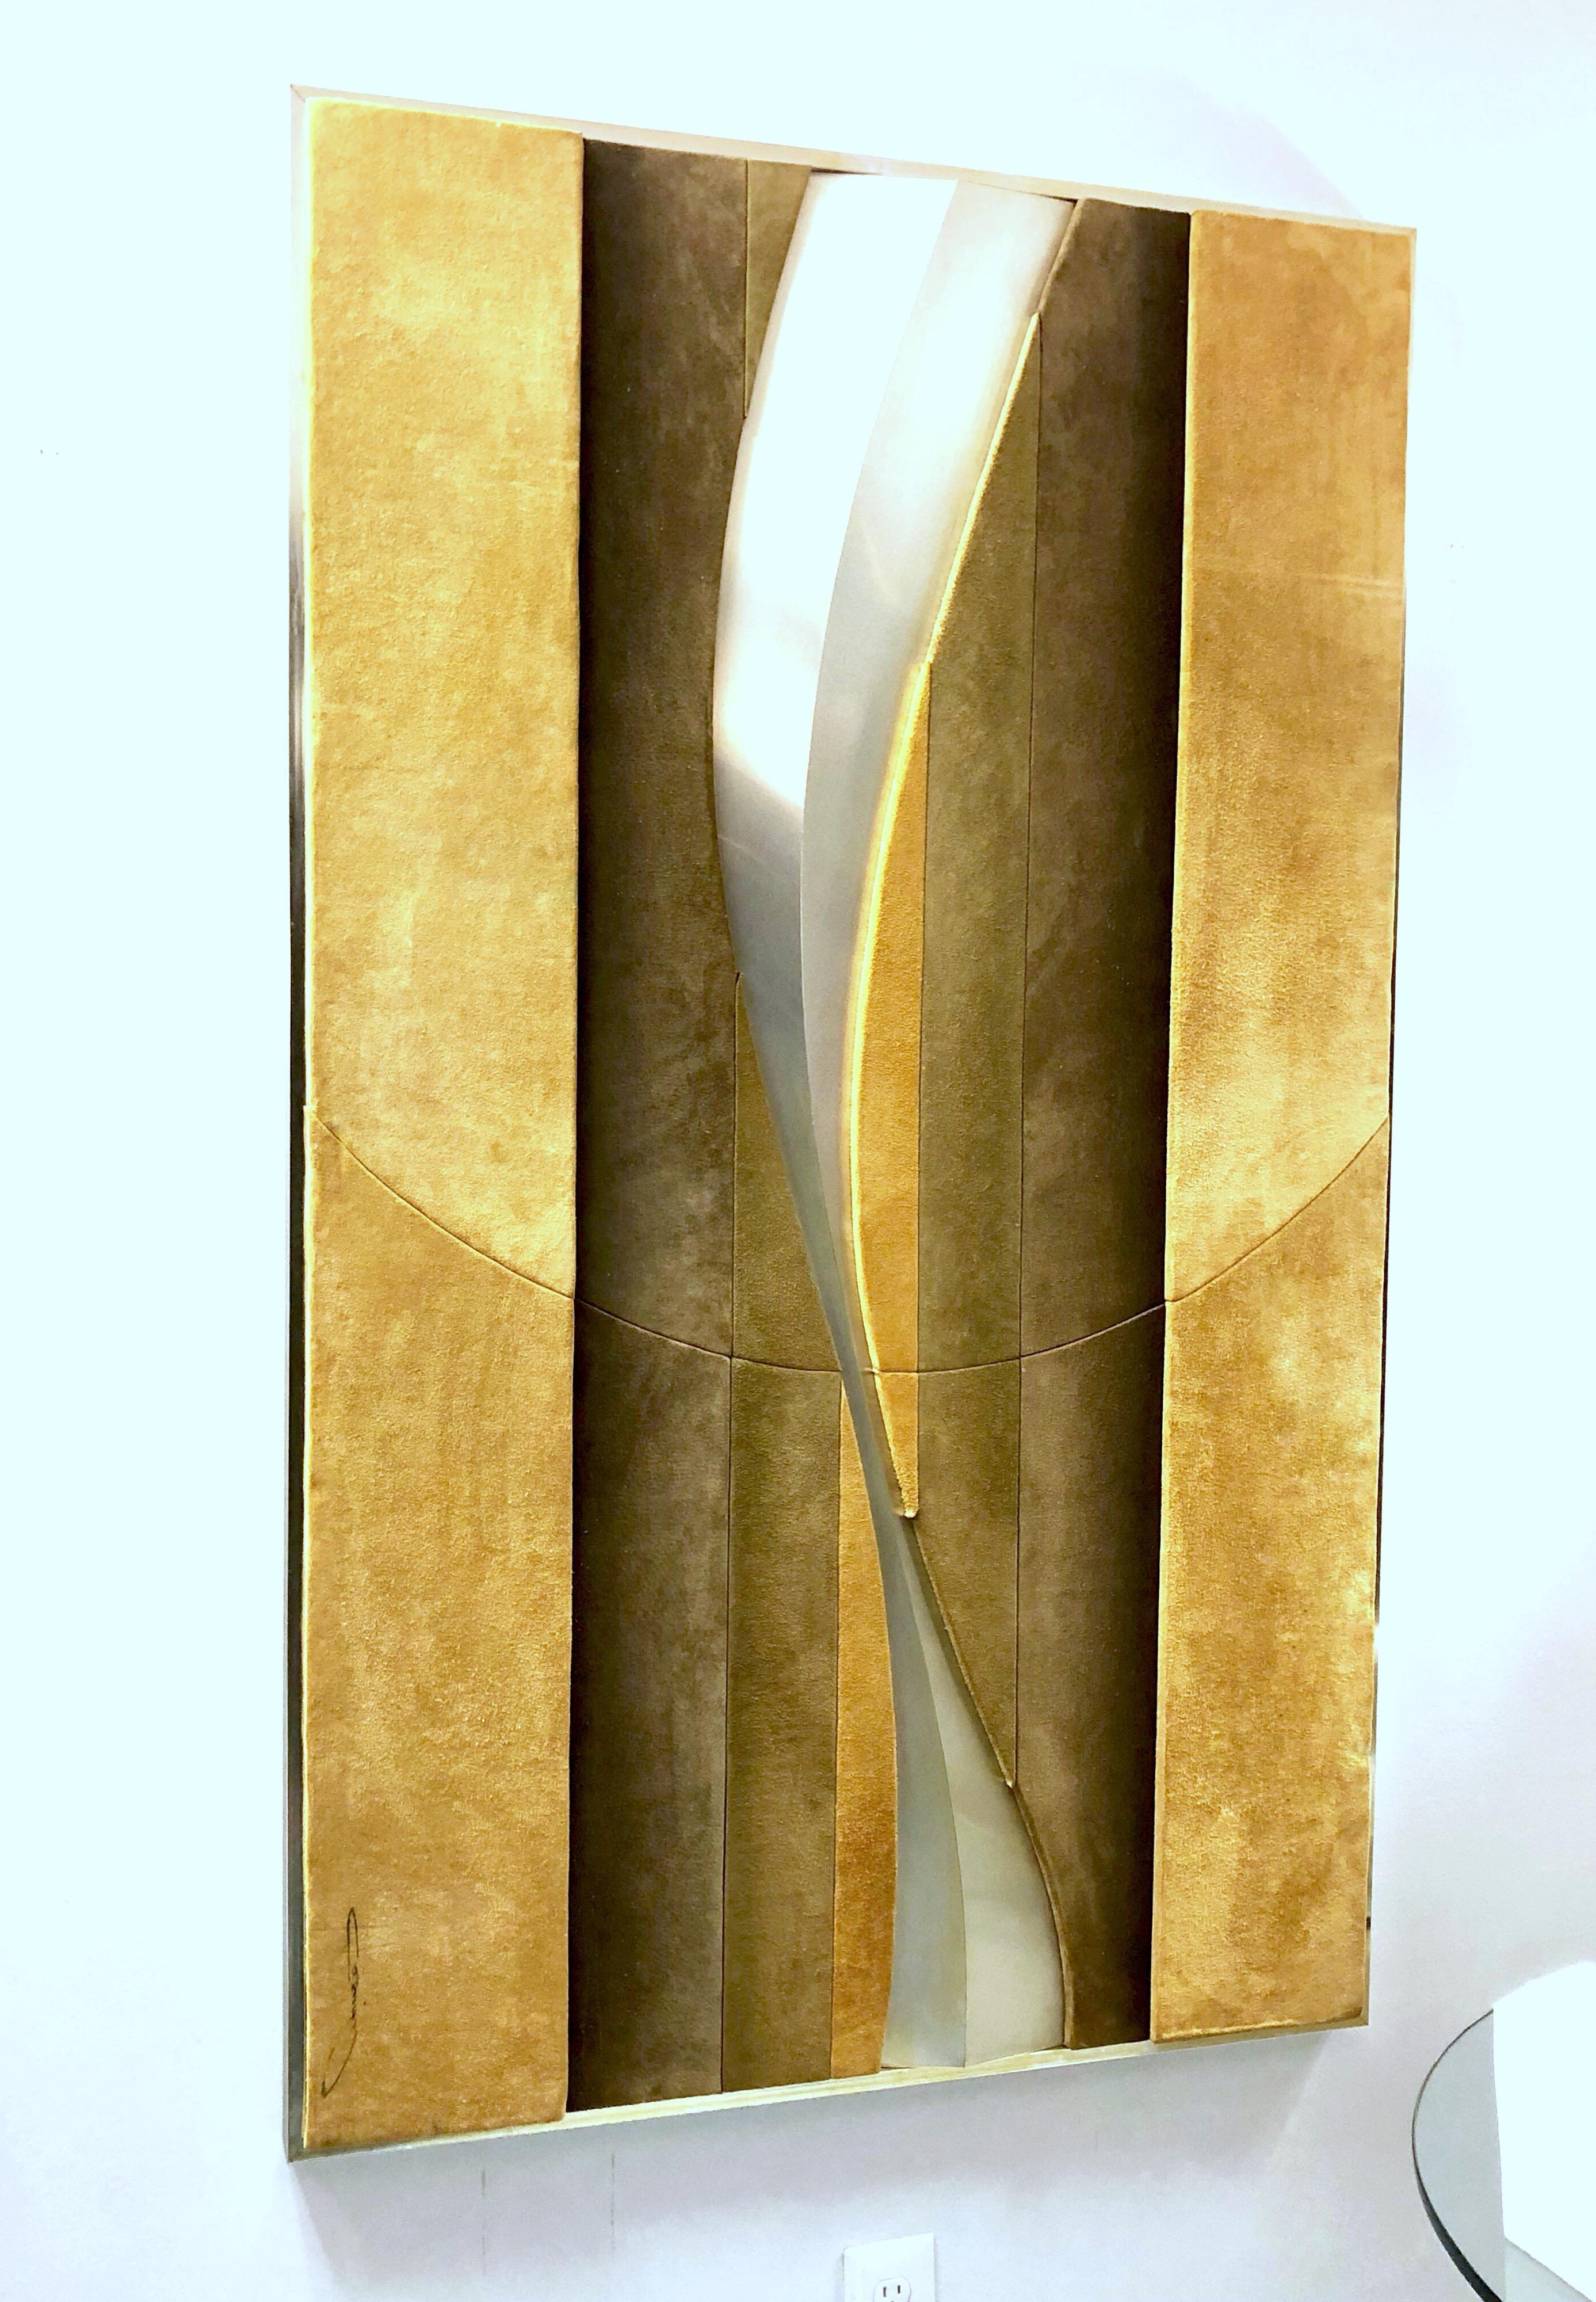 A very large sculptural wall art. Done in multiple pieces and tones of suede with a metal curving element arranged in an abstract design. Signed illegibly.